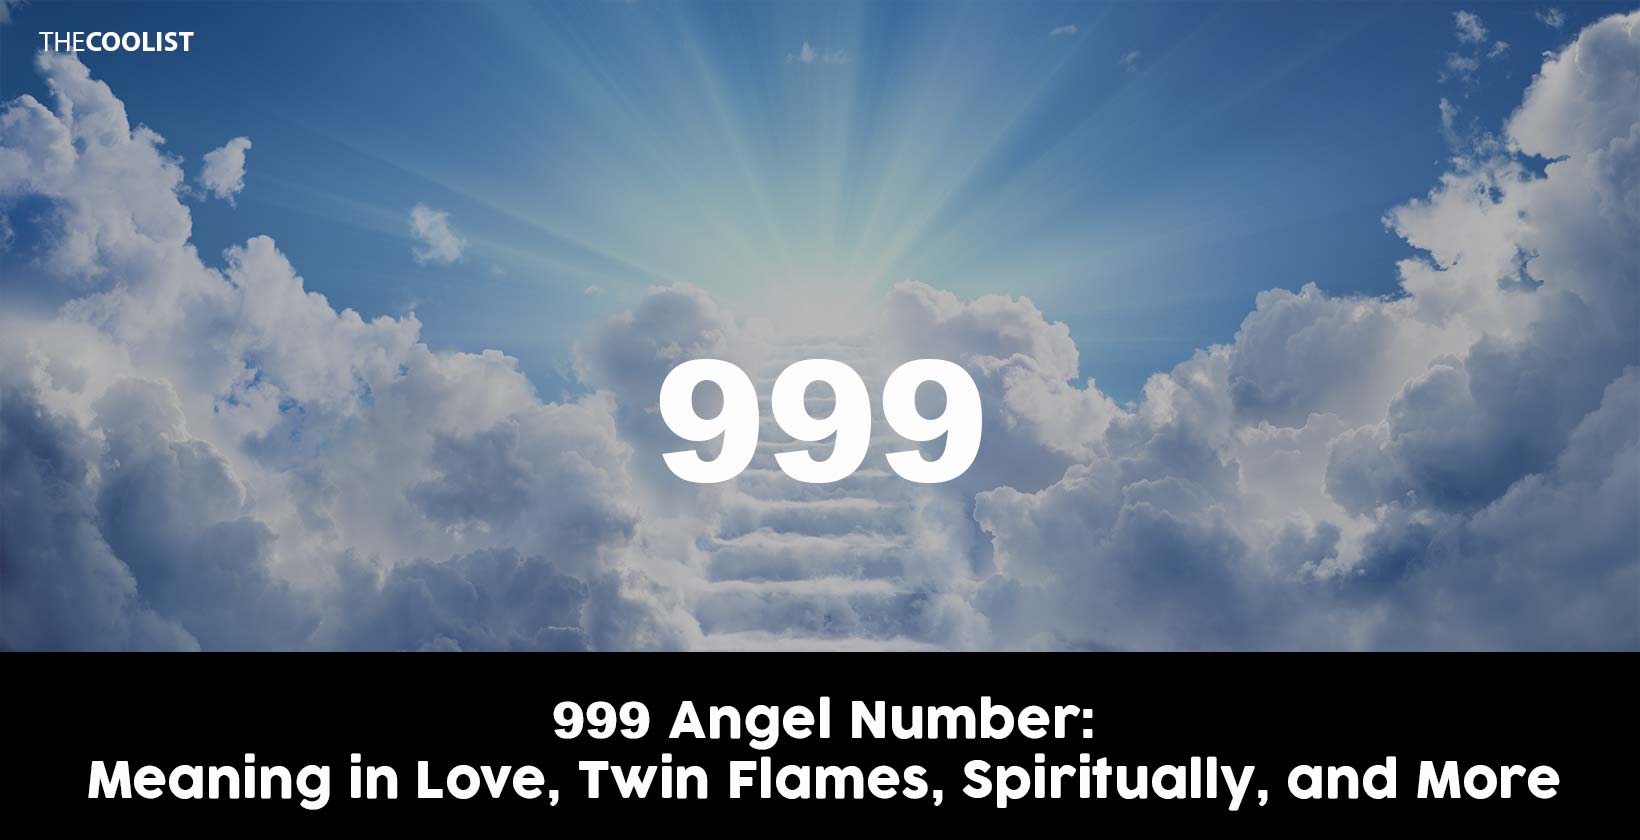 Seeing 999 Angel Number? Here's What It Means